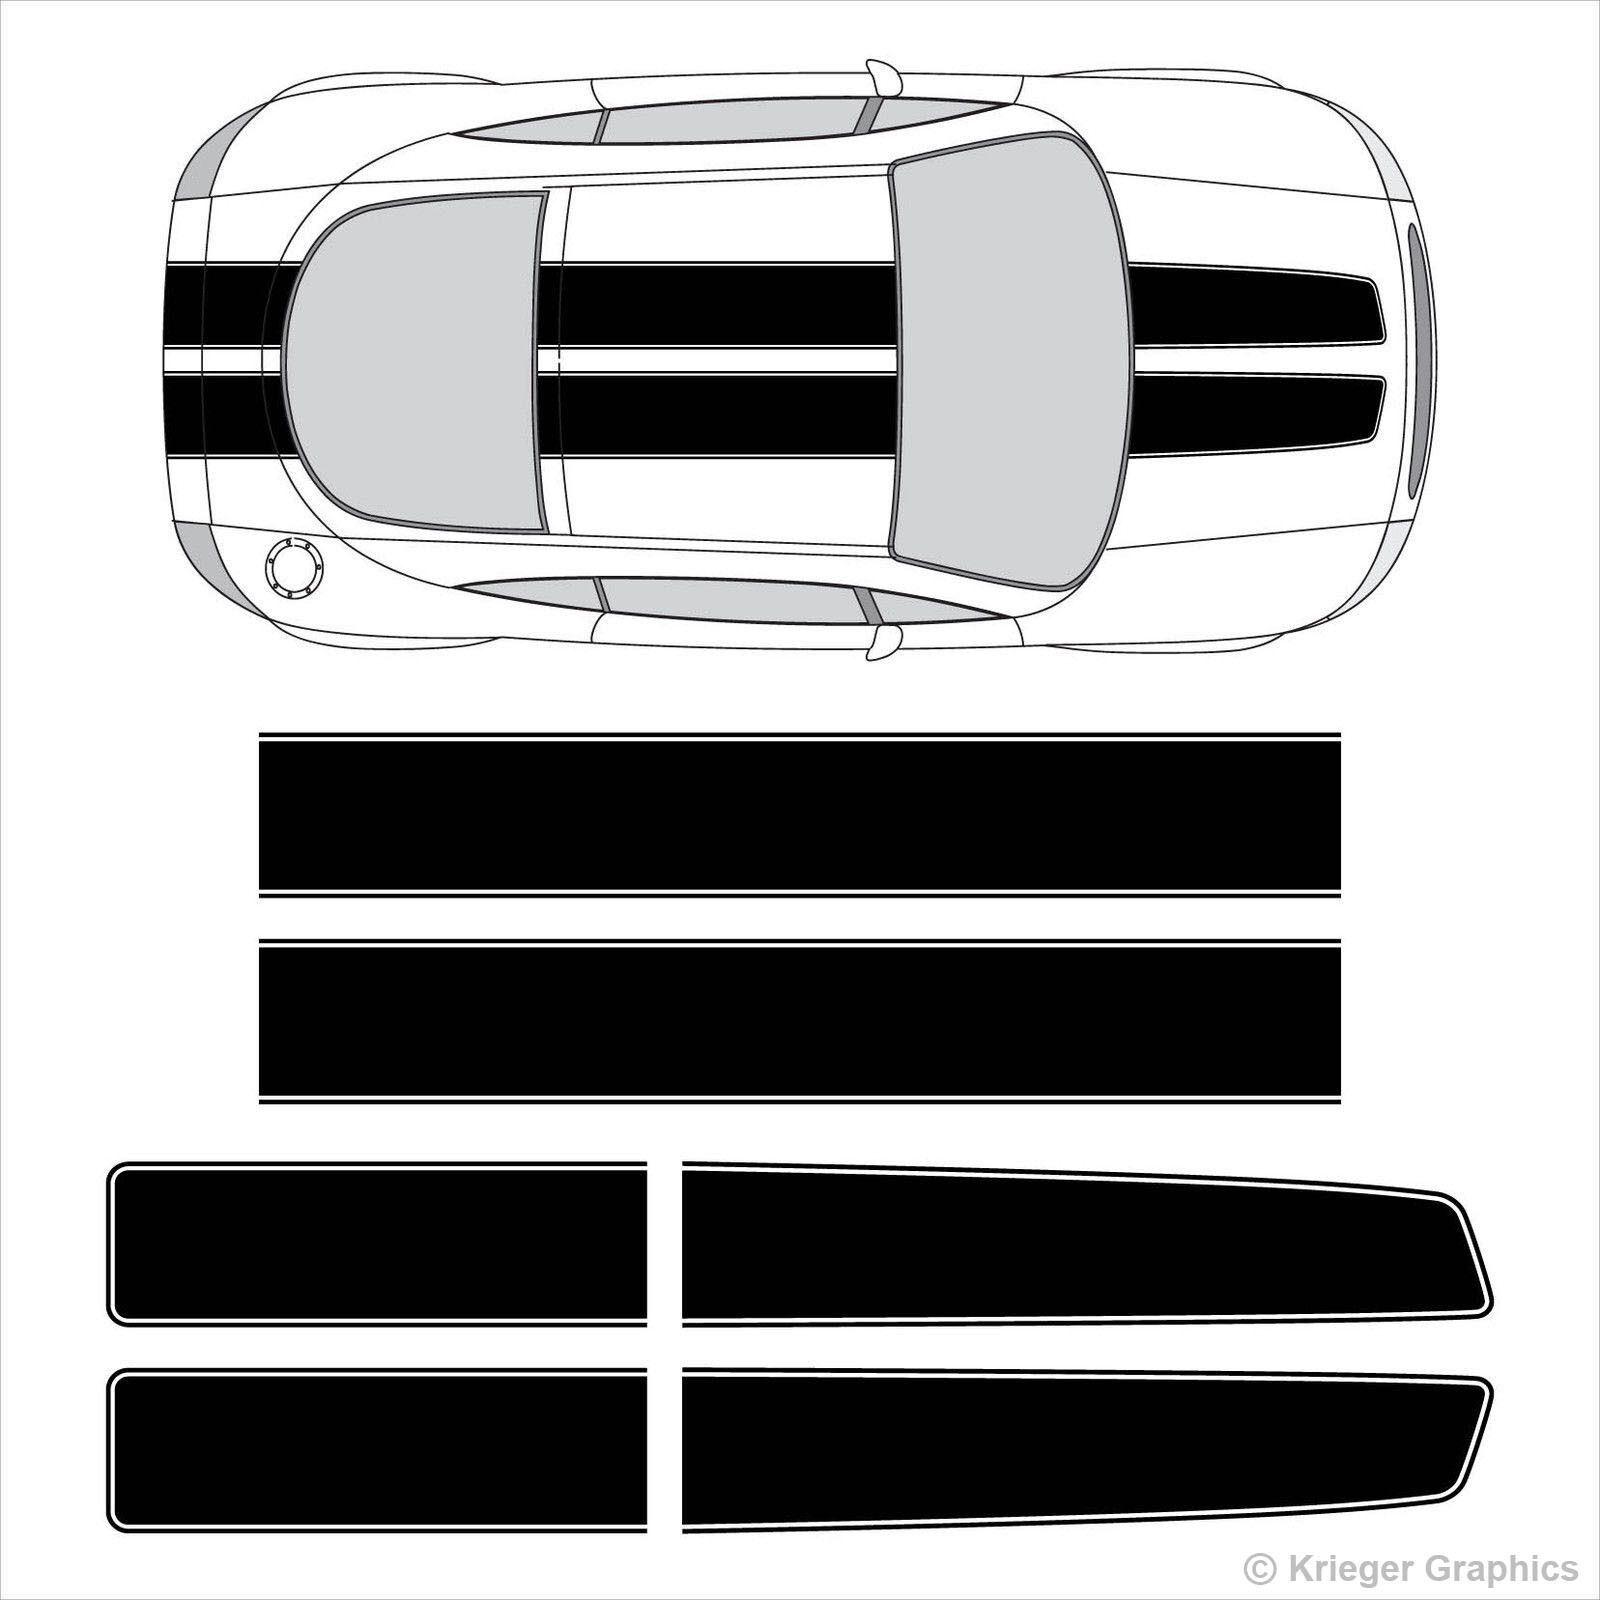 EZ Rally Racing Stripes 3M Vinyl Stripe Decals for Audi TT R8 RS5 S4 S5 A5